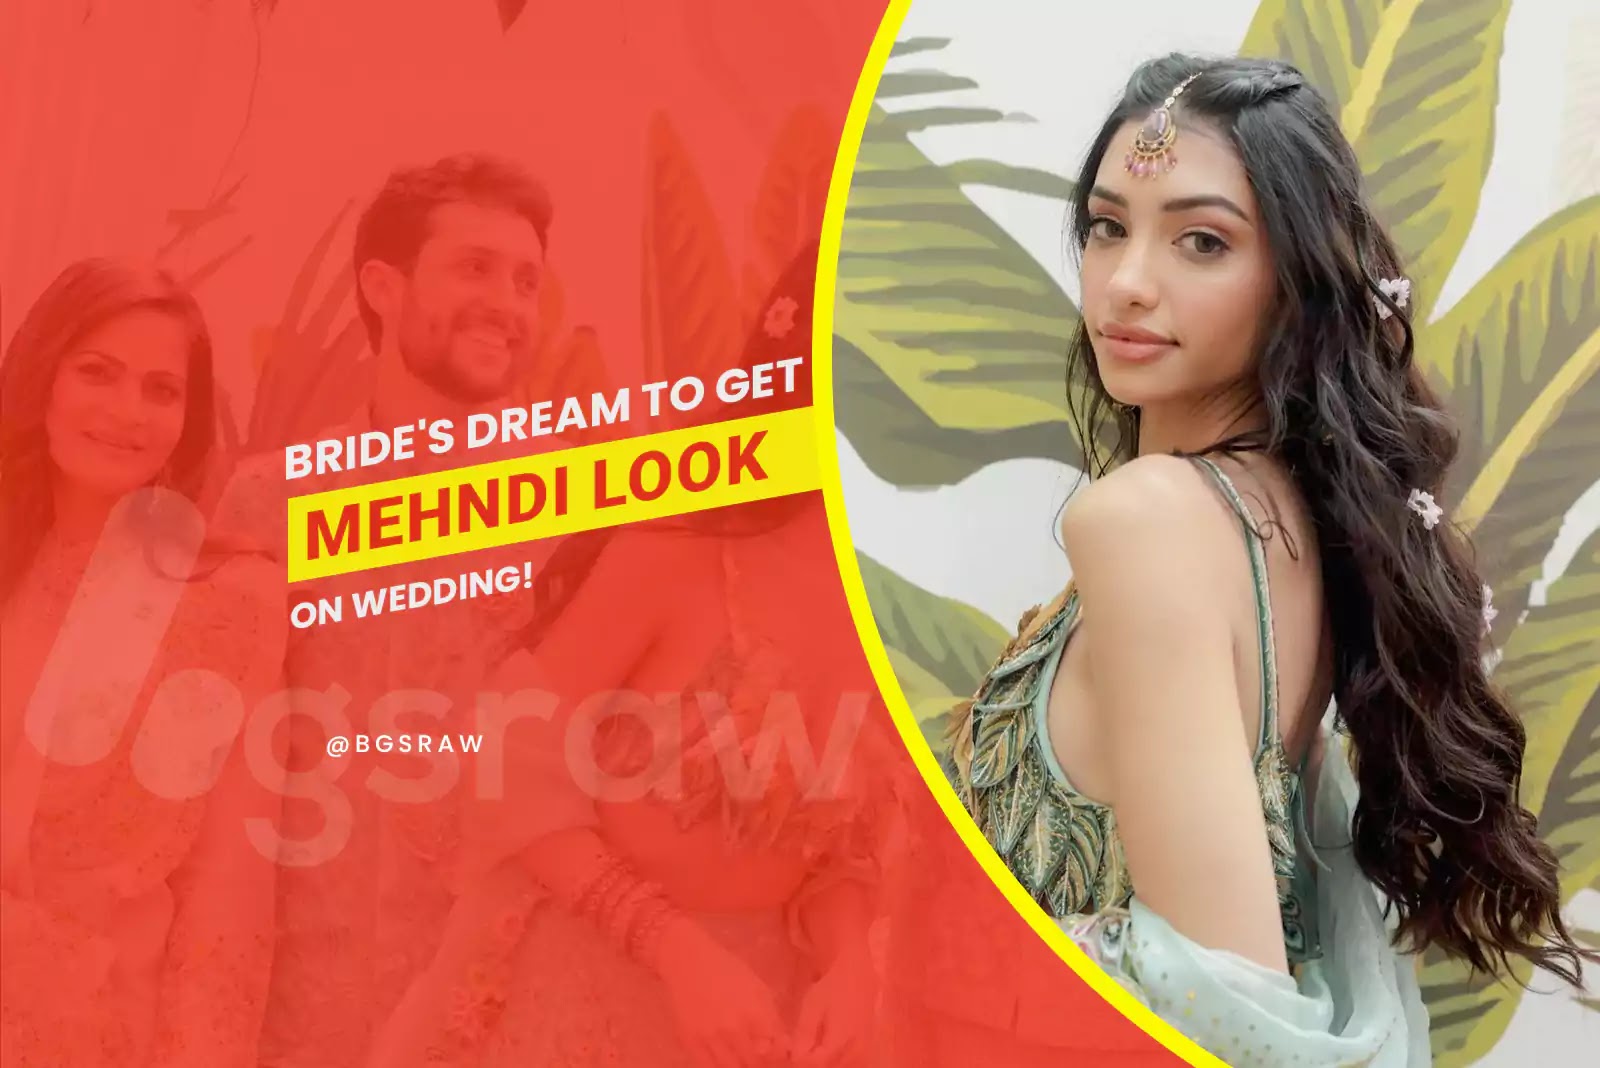 Every Bride's Dream to Get this Mehndi Look on Wedding inspired by Alanna Panday